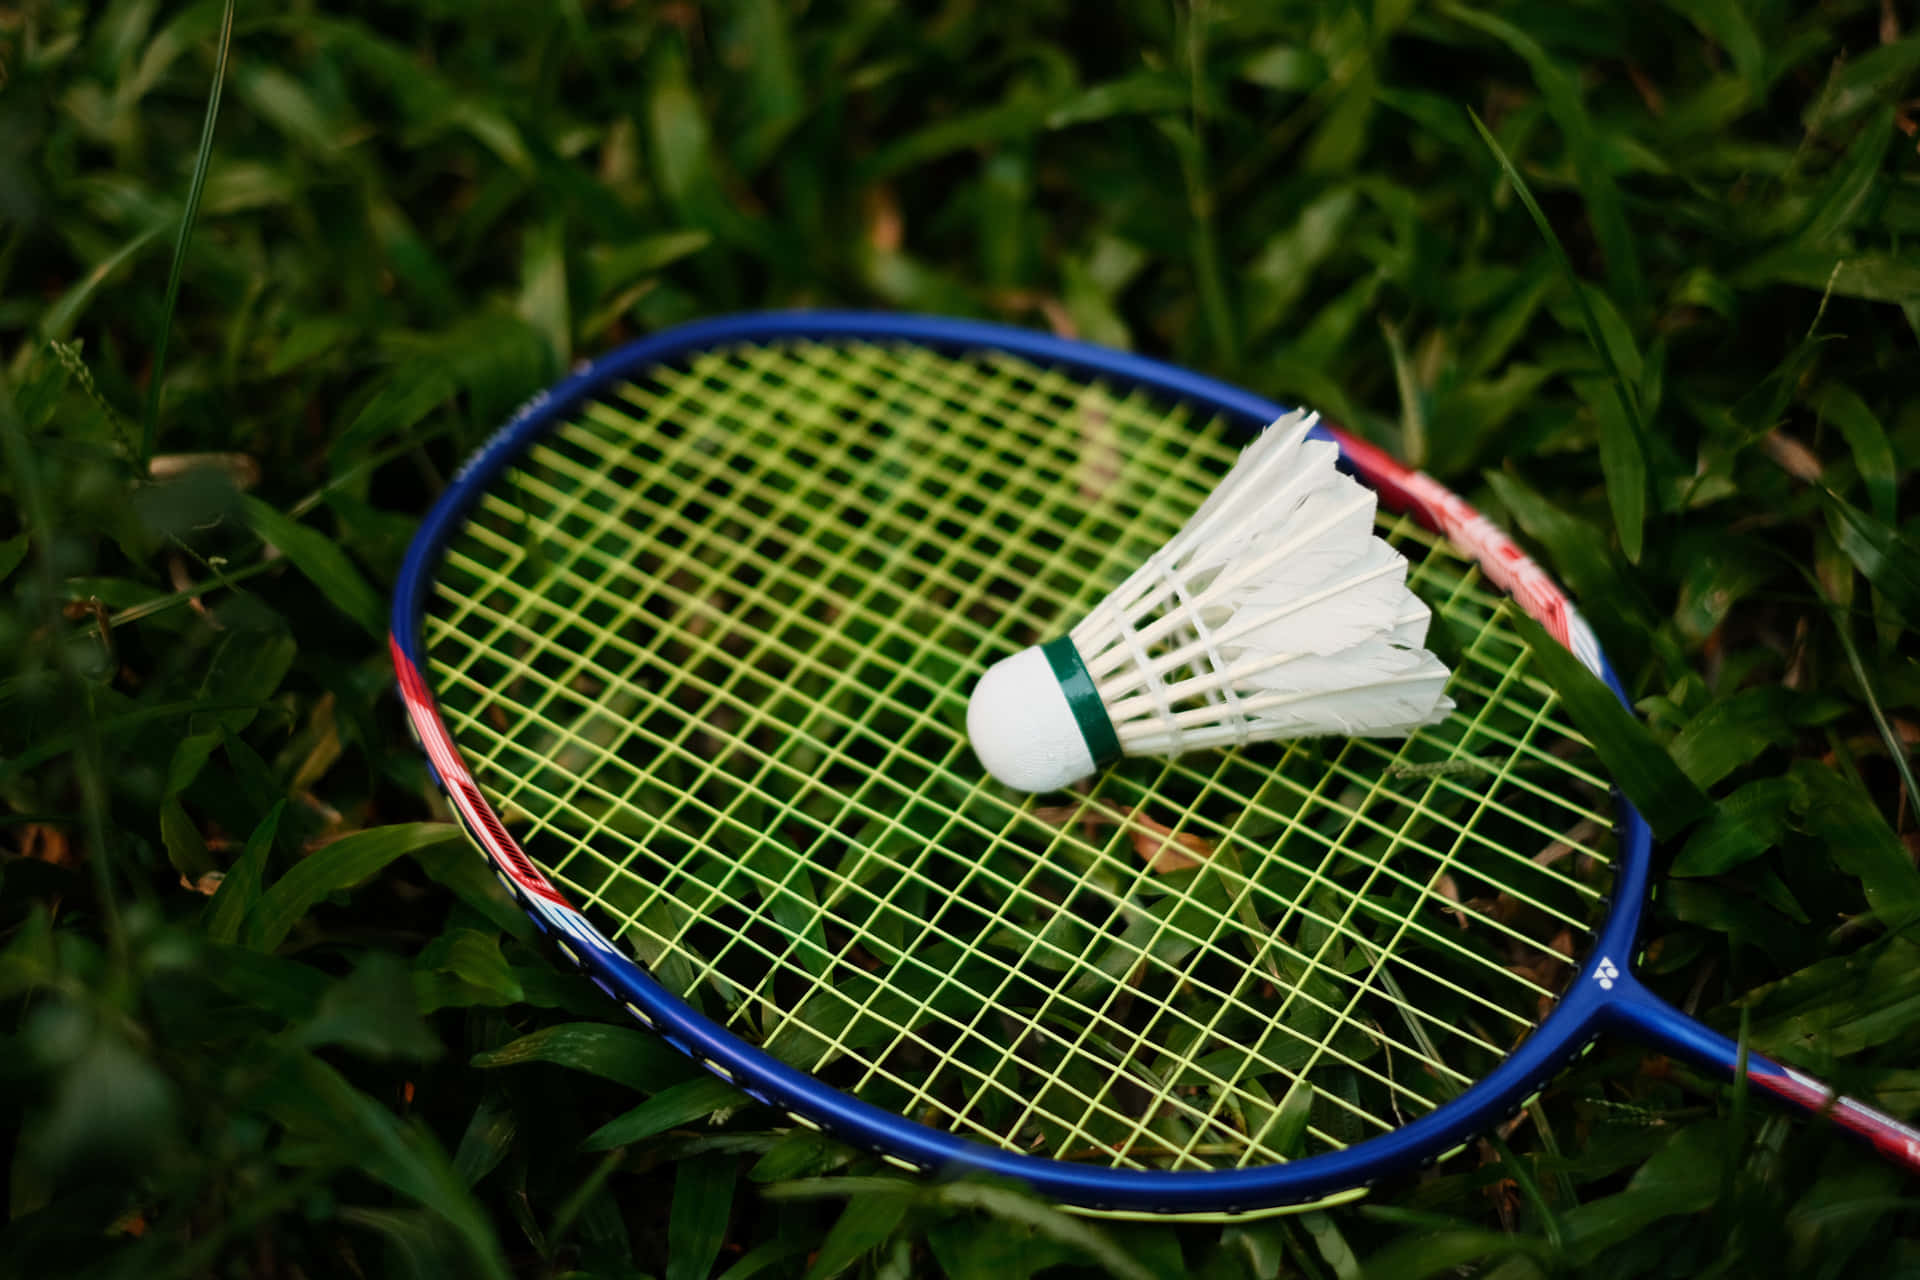 A Close-Up Shot of Badminton Players in Action